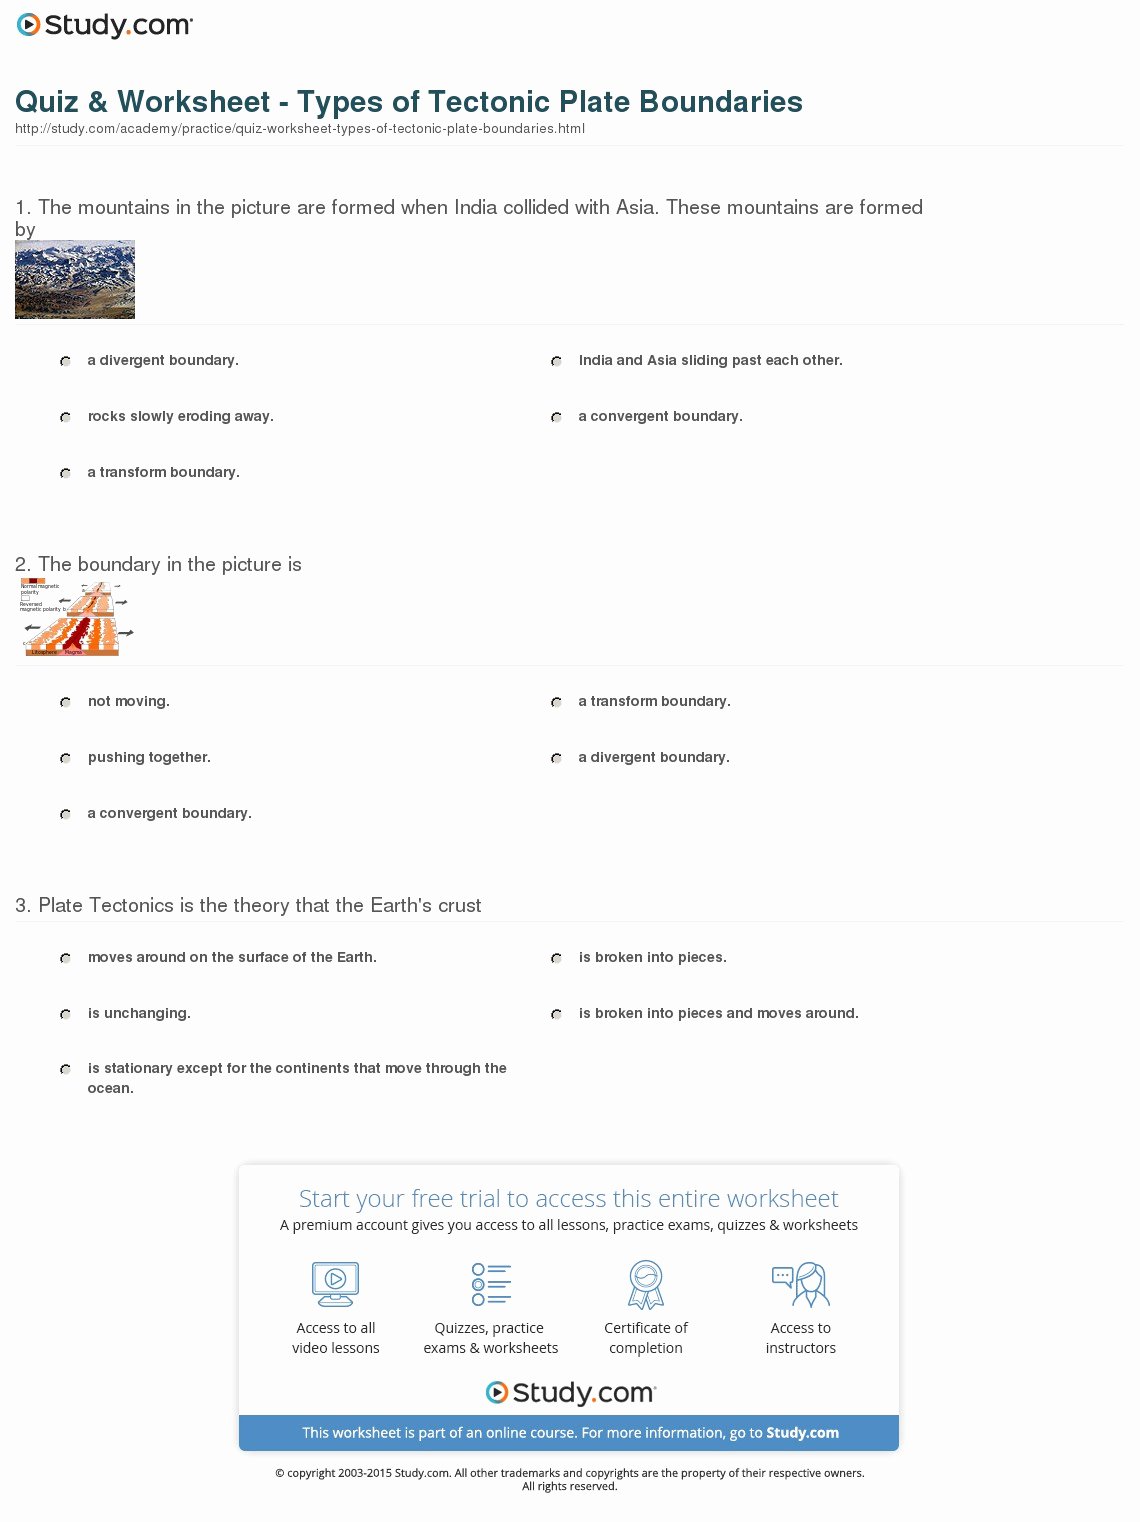 Plate Tectonics Worksheet Answers Awesome Quiz &amp; Worksheet Types Of Tectonic Plate Boundaries